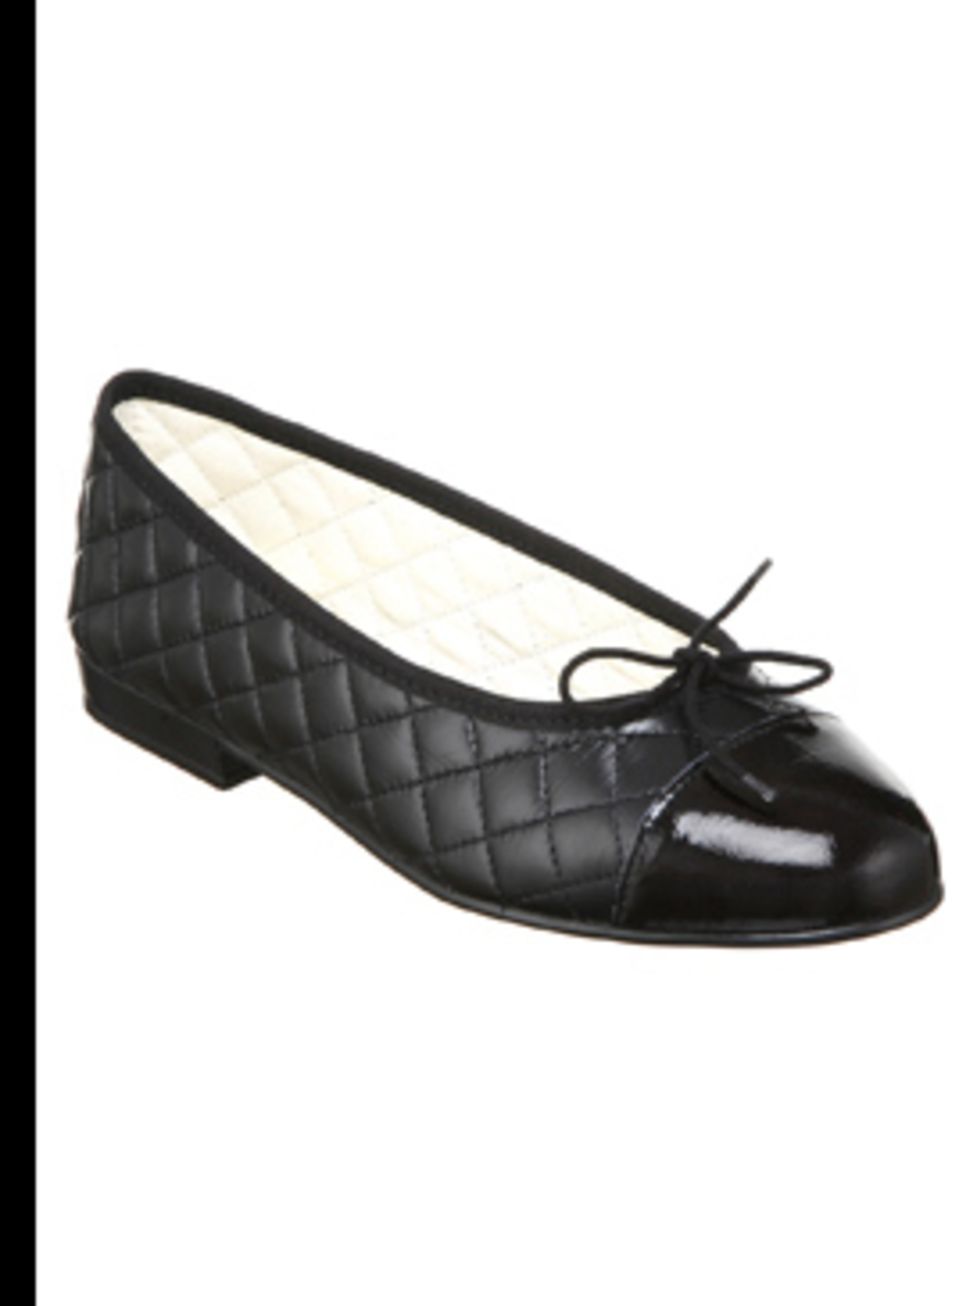 <p>Shoes, £70.00 by <a href="http://www.frenchsole.com/product_info.php?shoe_id=rt8by%20kog0LeooOp">French Sole</a></p>